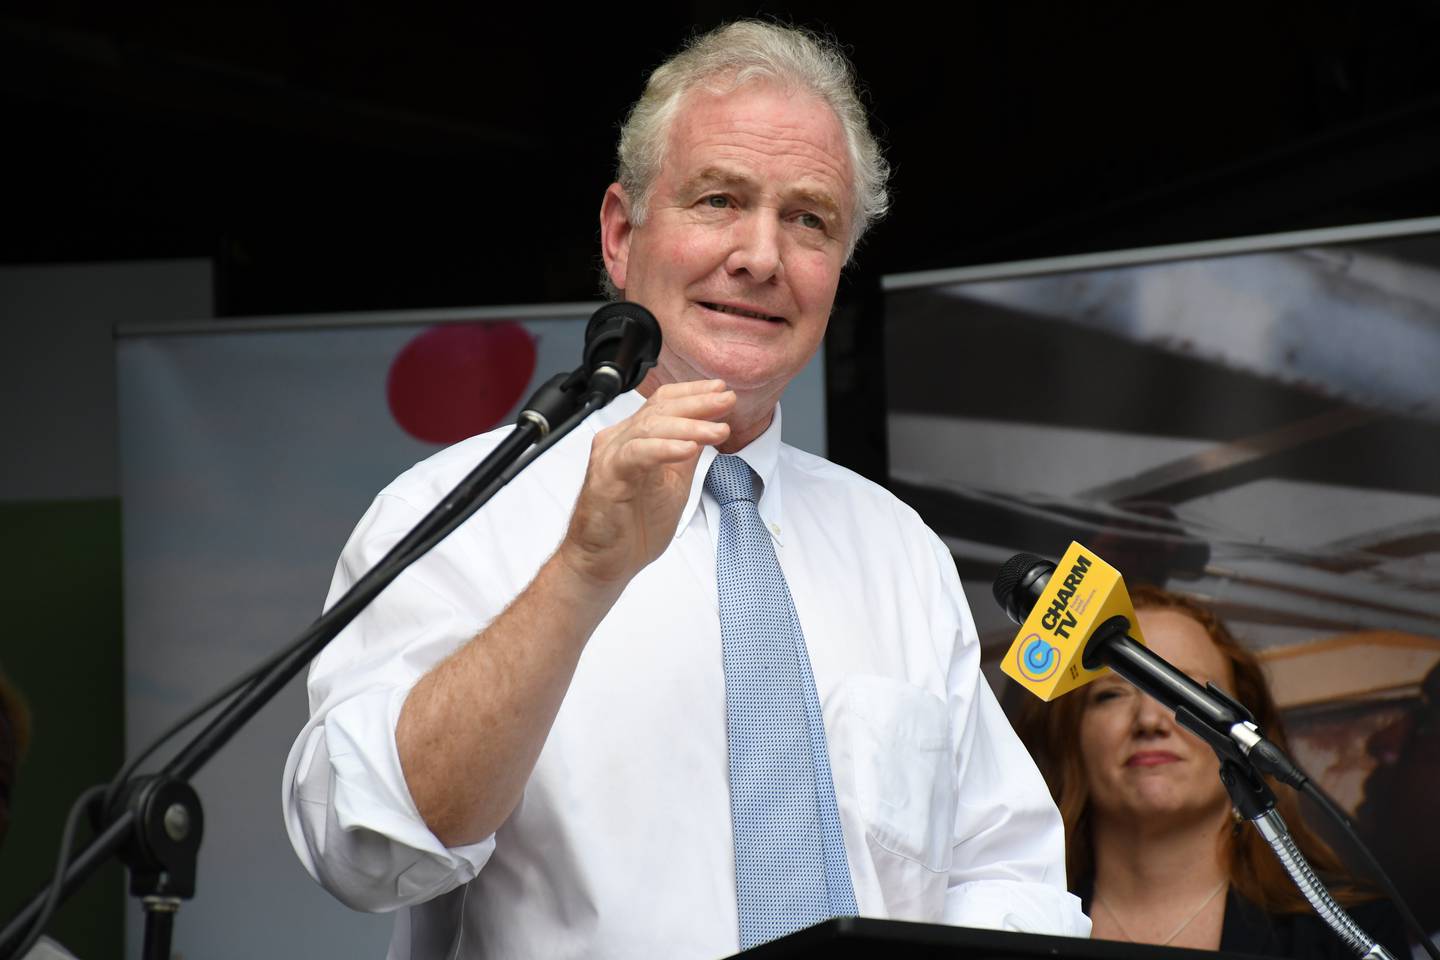 U.S. Sen. Chris Van Hollen, a Democrat, touts the passage of the Inflation Reduction Act while visiting the headquarters of the Green & Healthy Homes Initiative in Baltimore's Canton neighborhood on Monday, Aug. 15, 2022.